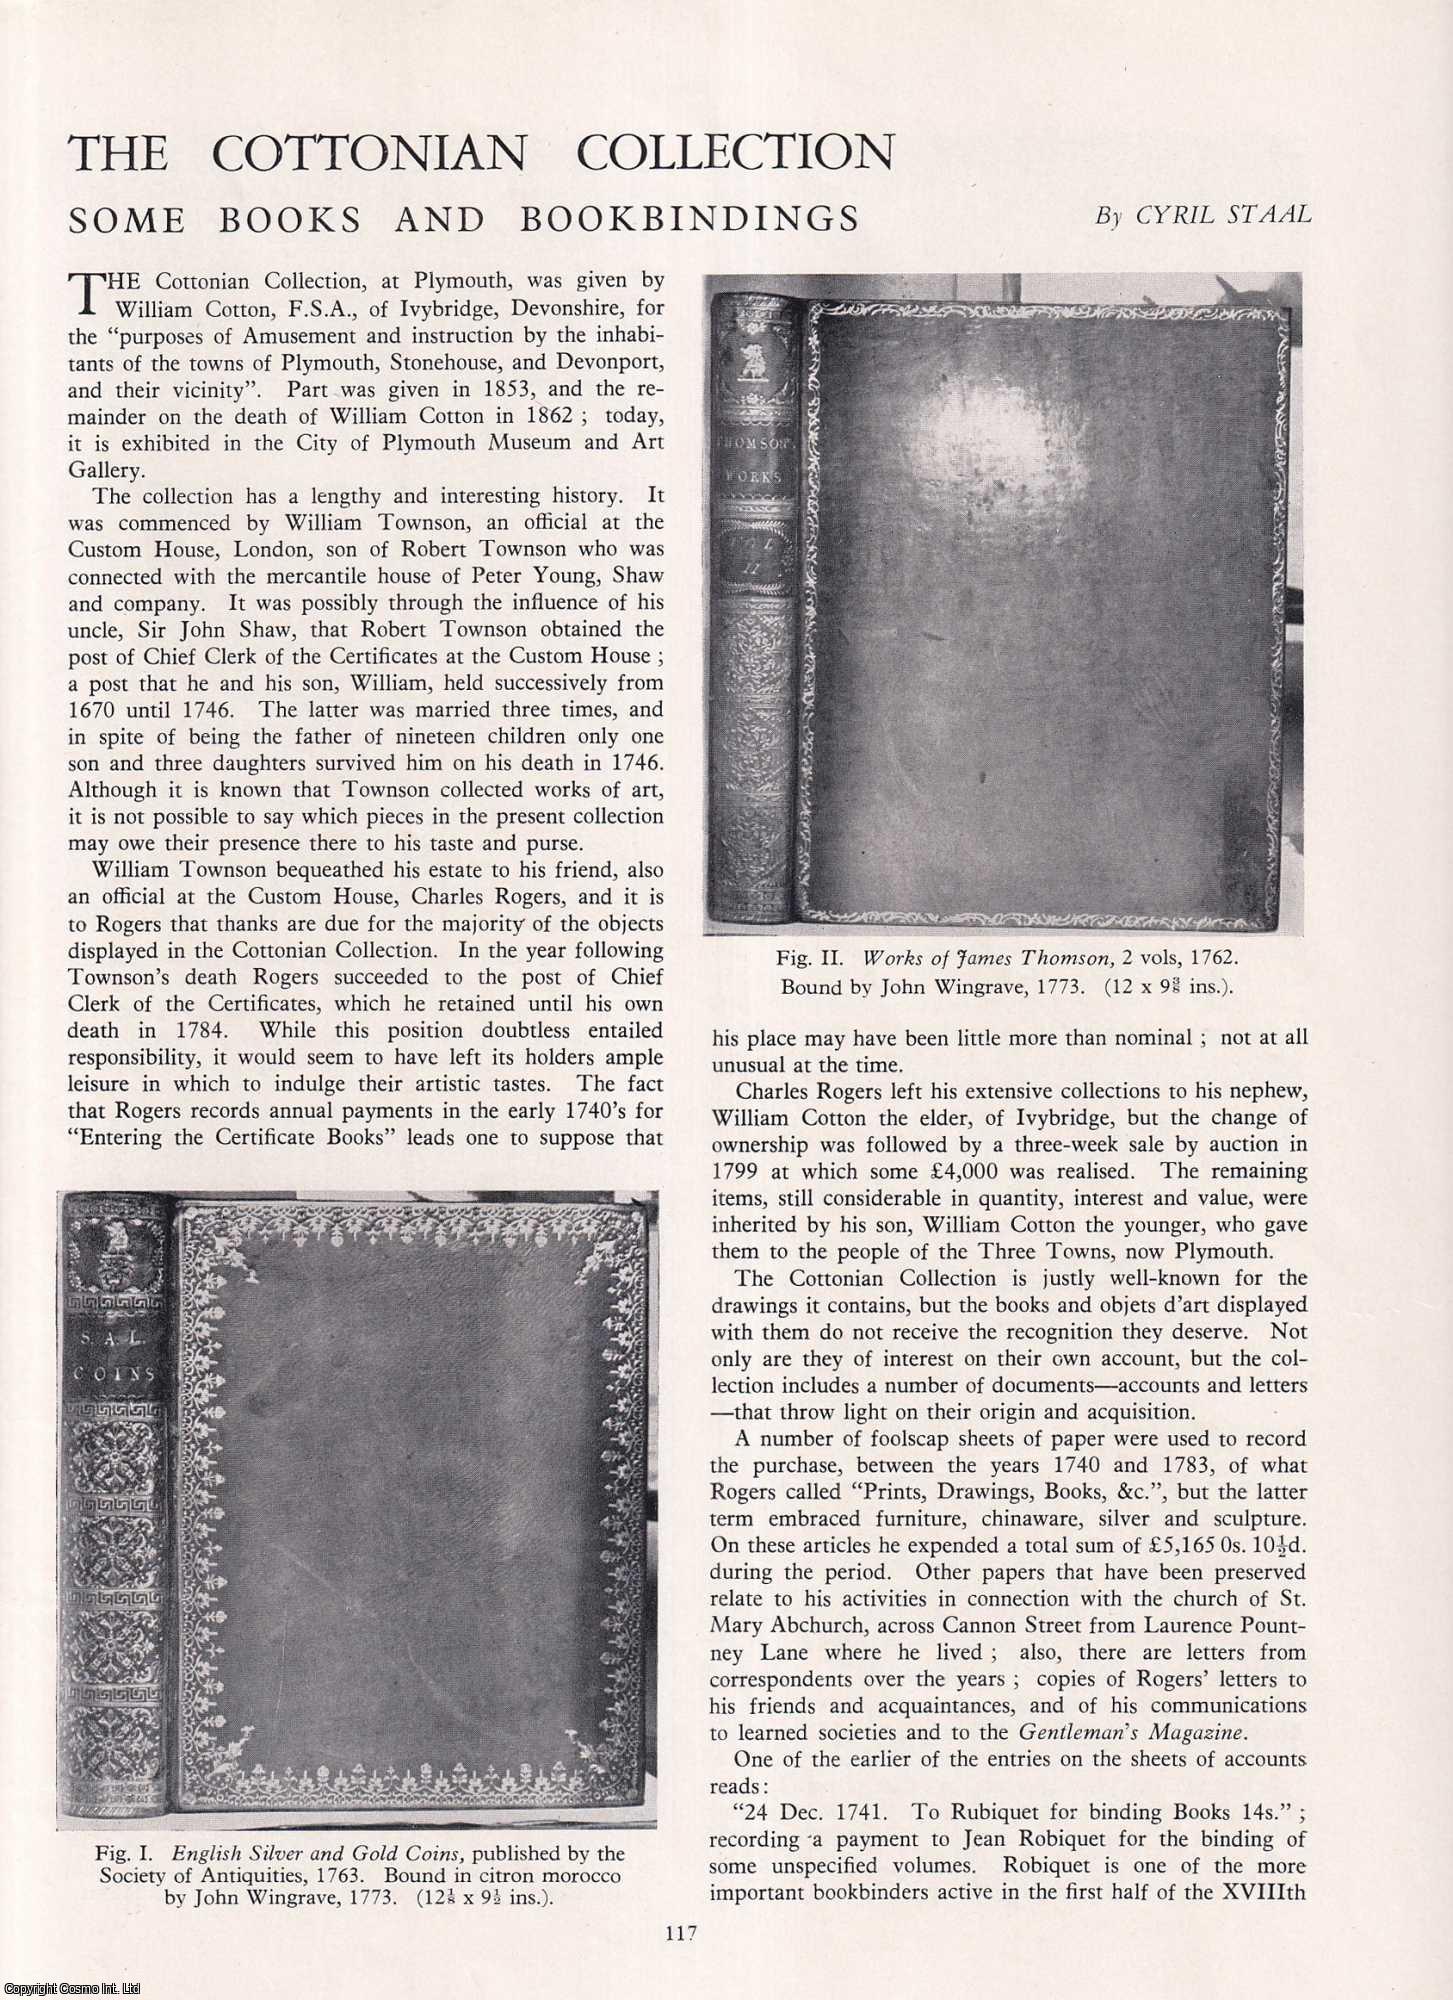 Cyril Staal - The Cottonian Collection: Some Books and Bookbindings. An original article from Apollo, International Magazine of the Arts, 1959.